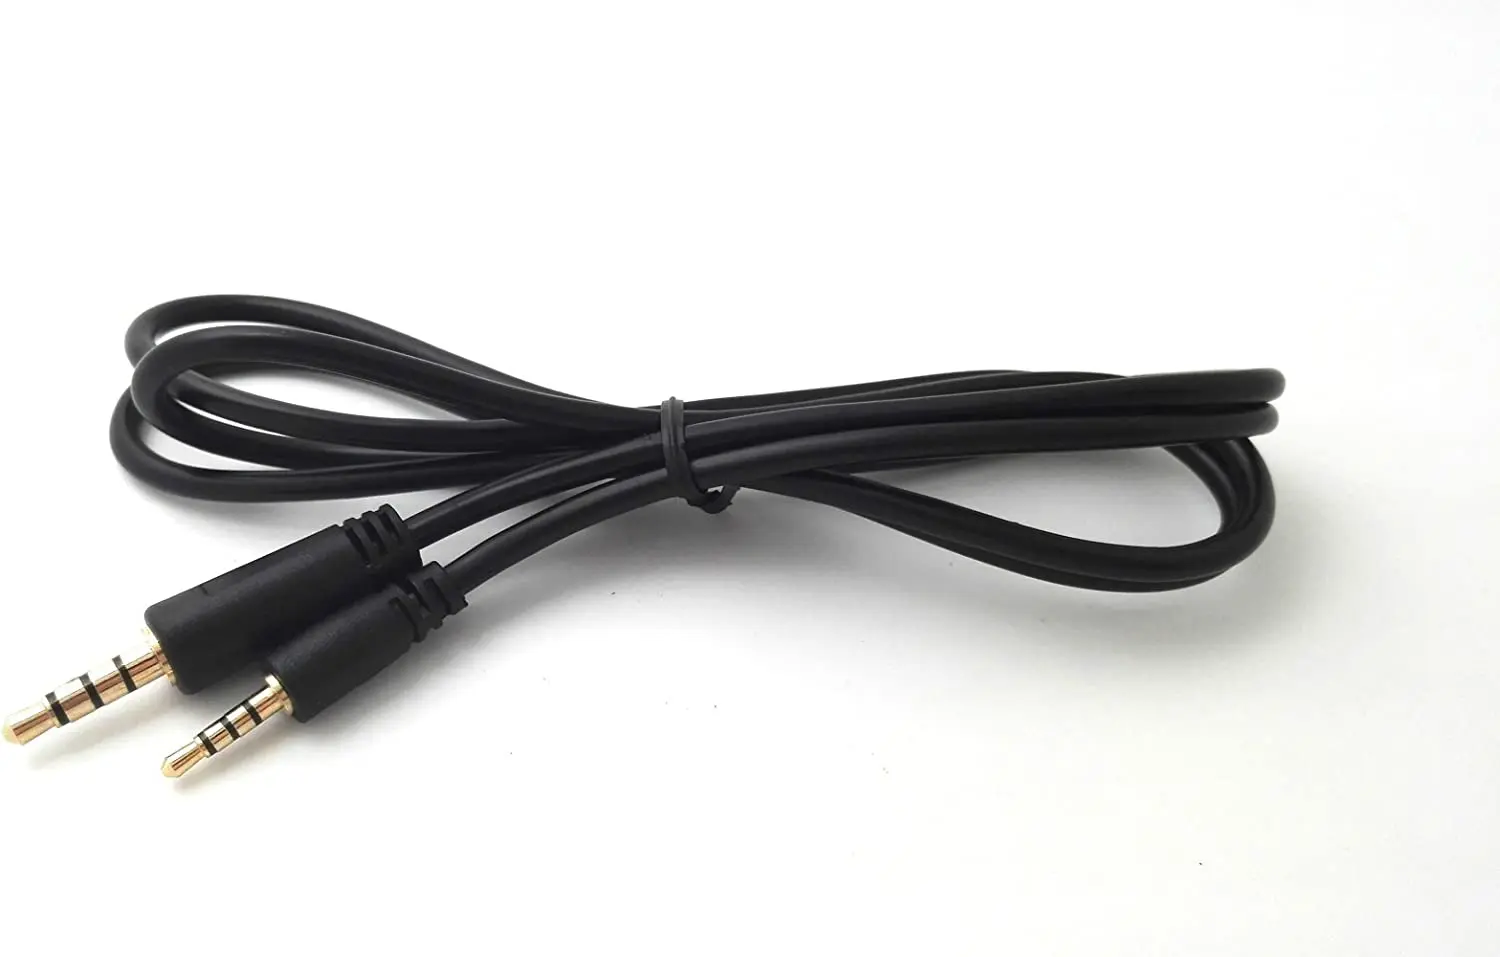 Replacement Audio Cable for JBL Synchros S300 S300I S300a S500 S700 S400BT J56BT E40BT E30 E40 E50BT S400BT Headphones